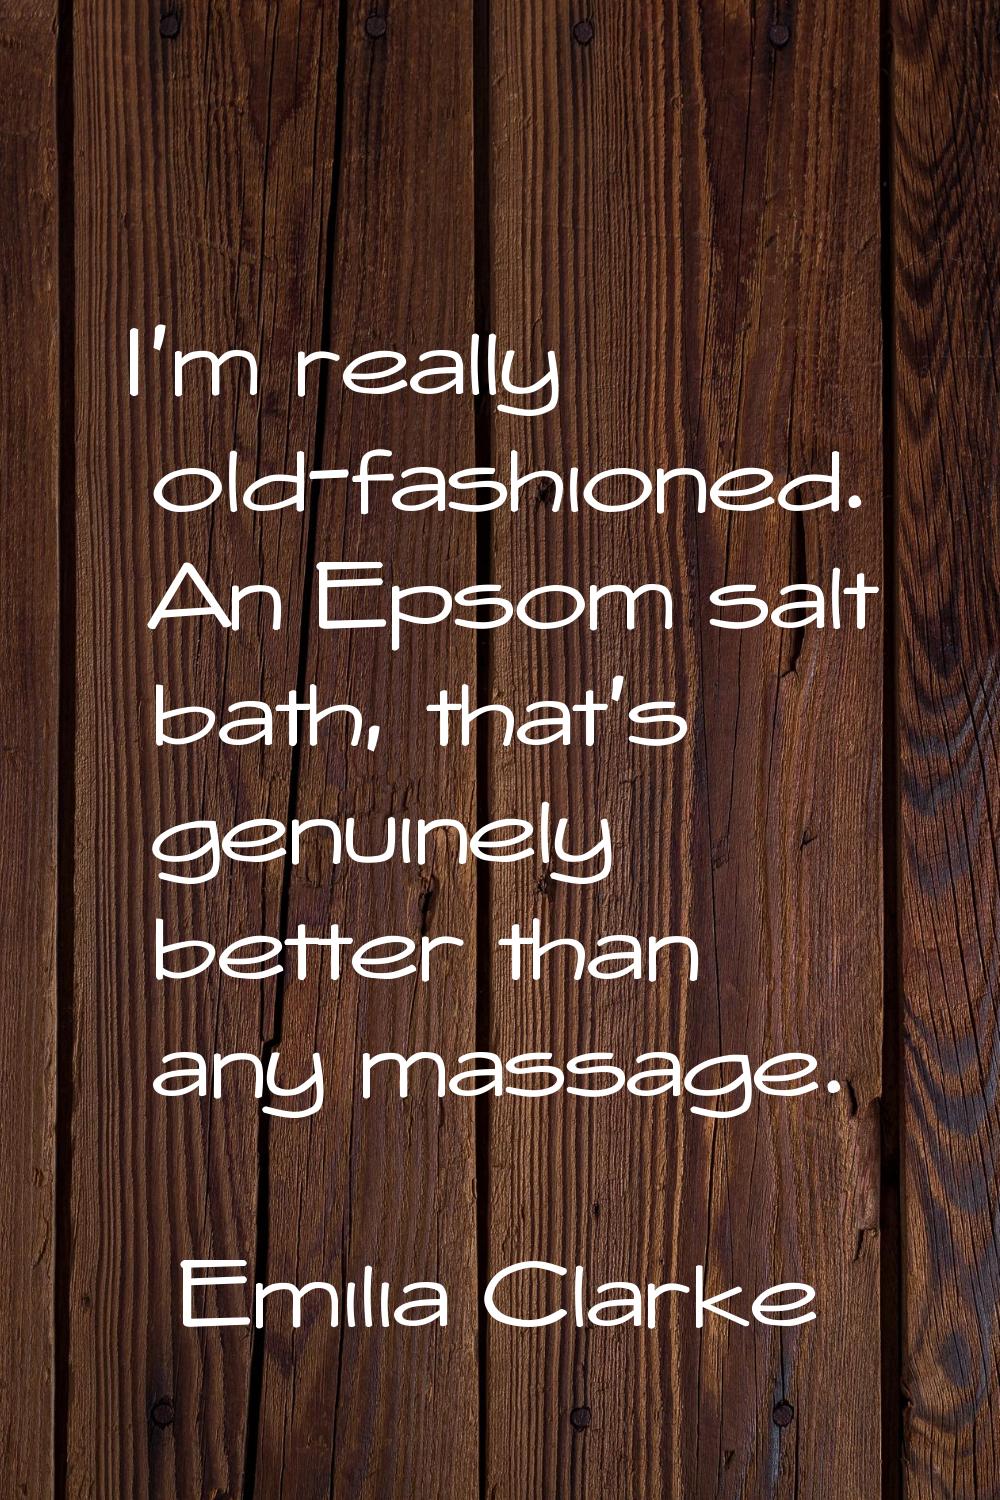 I'm really old-fashioned. An Epsom salt bath, that's genuinely better than any massage.